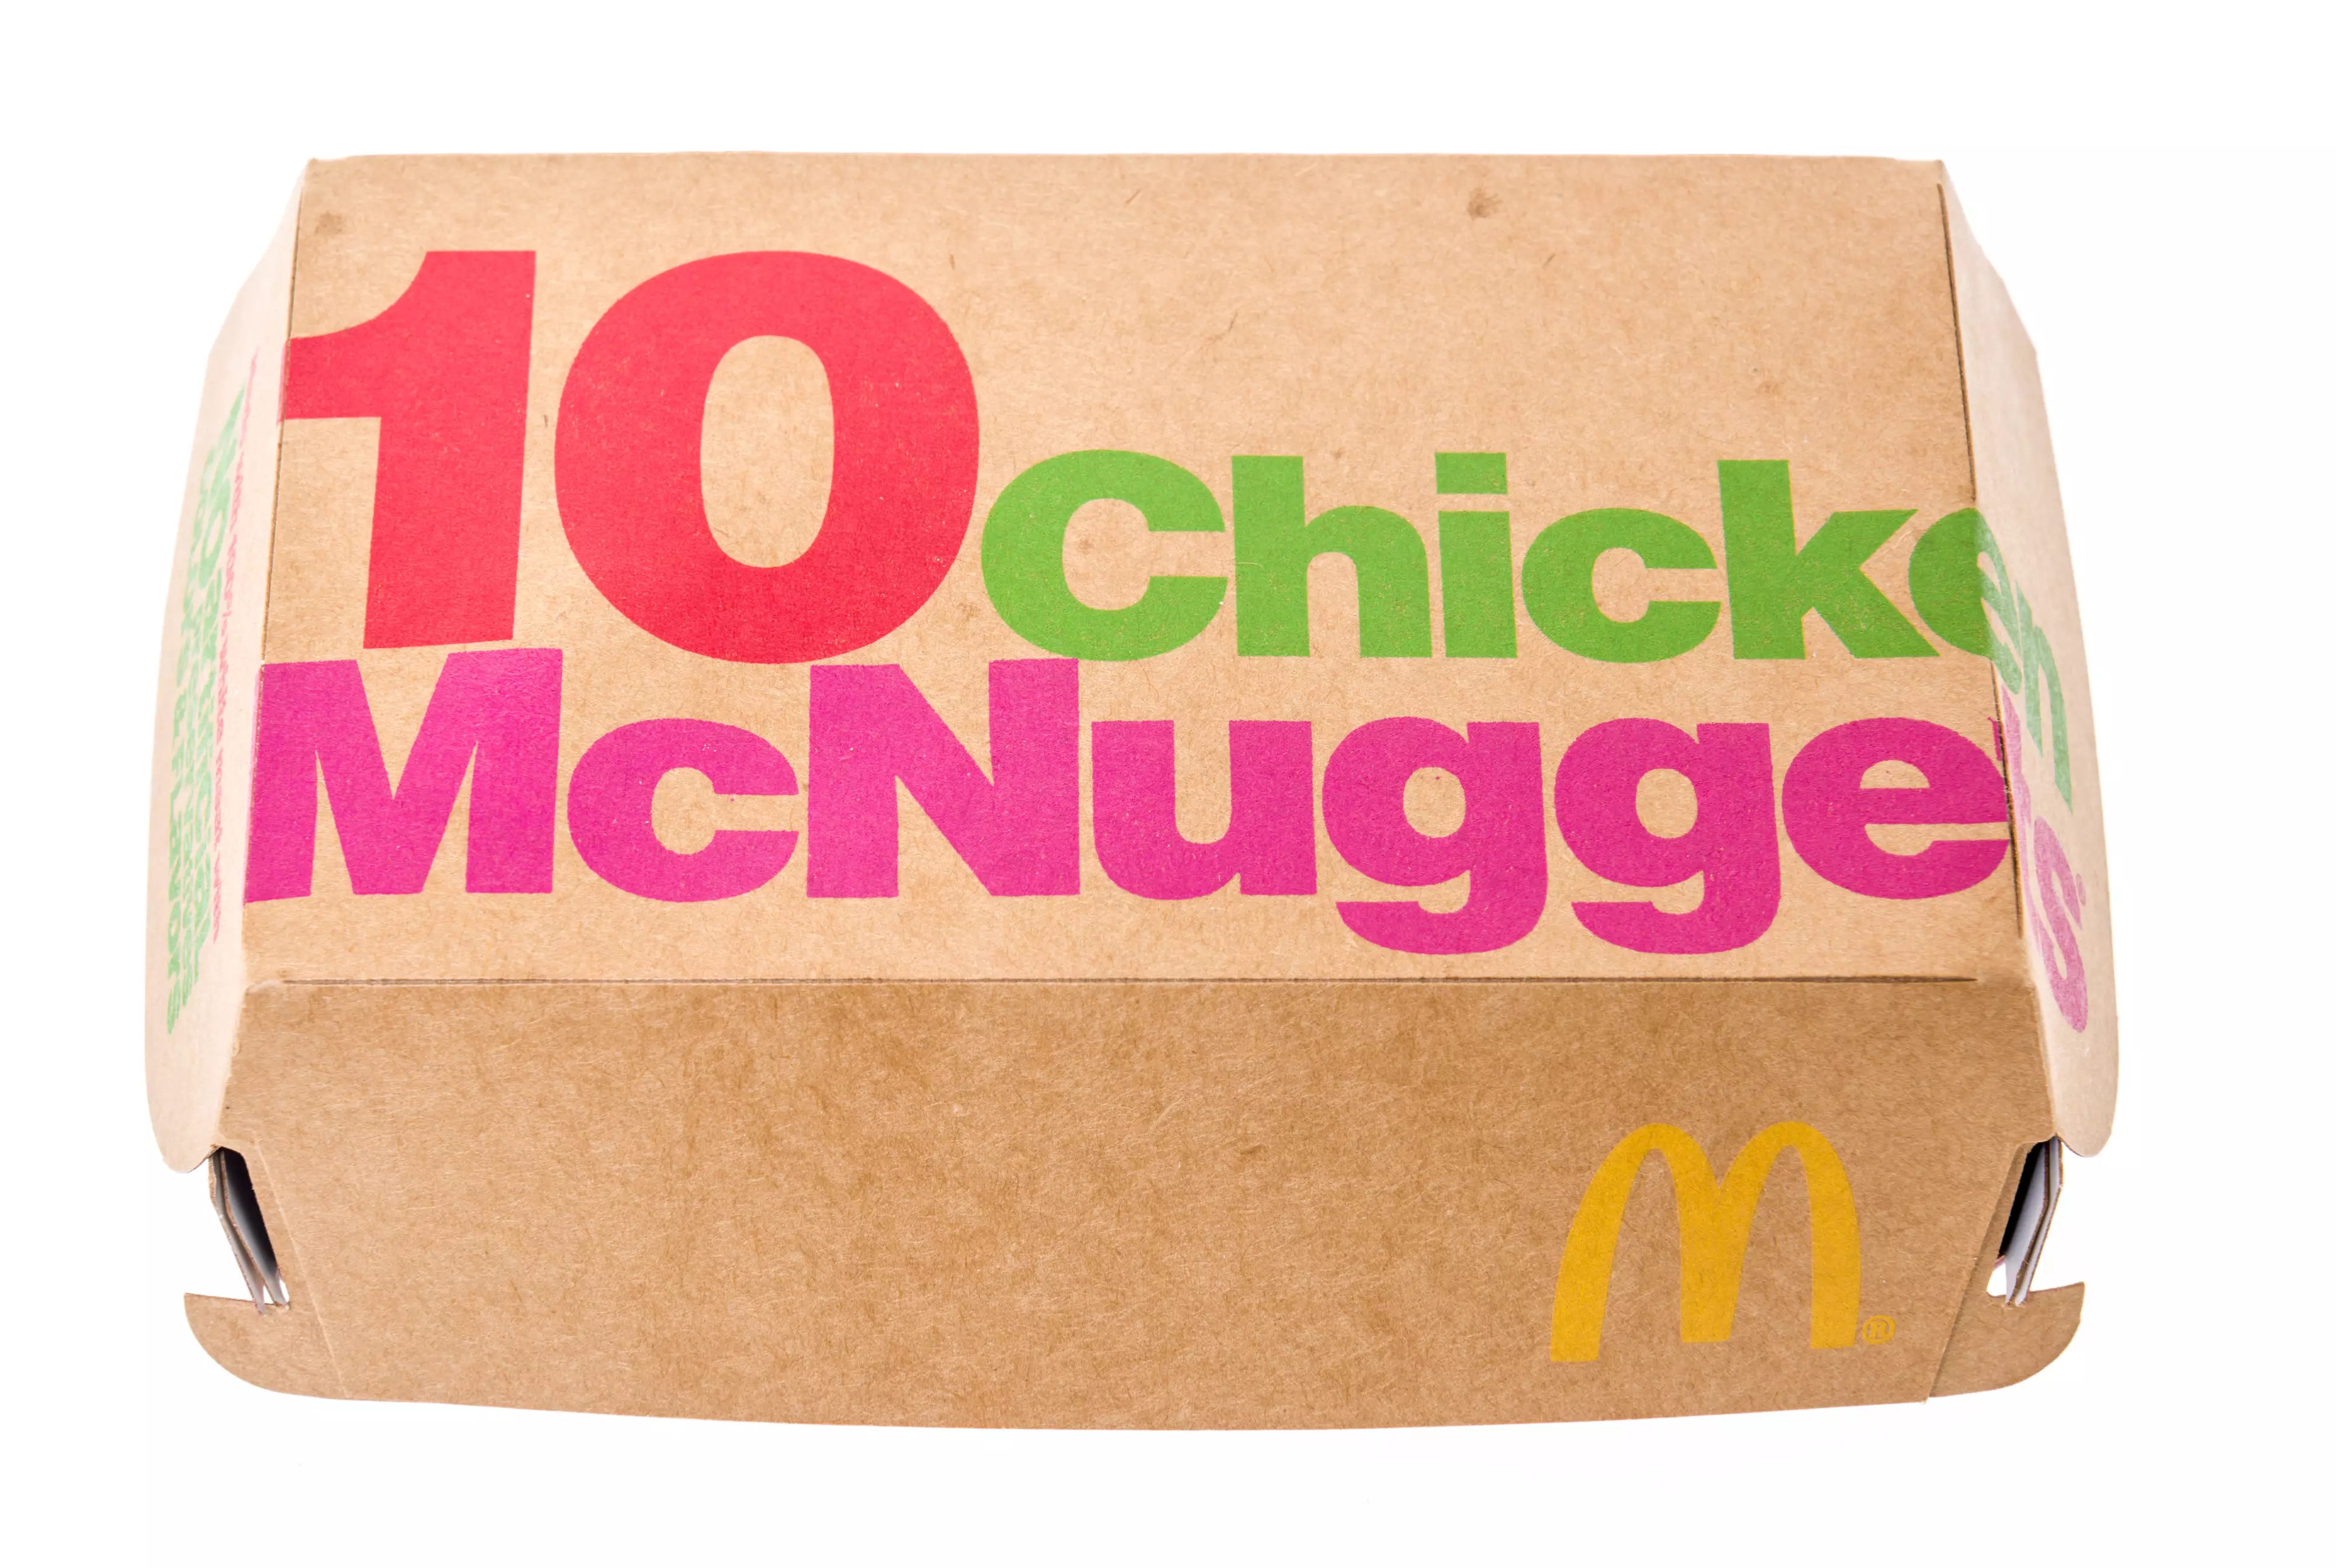 During lockdown, many of us are experiencing serious craving for our go-to McDonald's order (